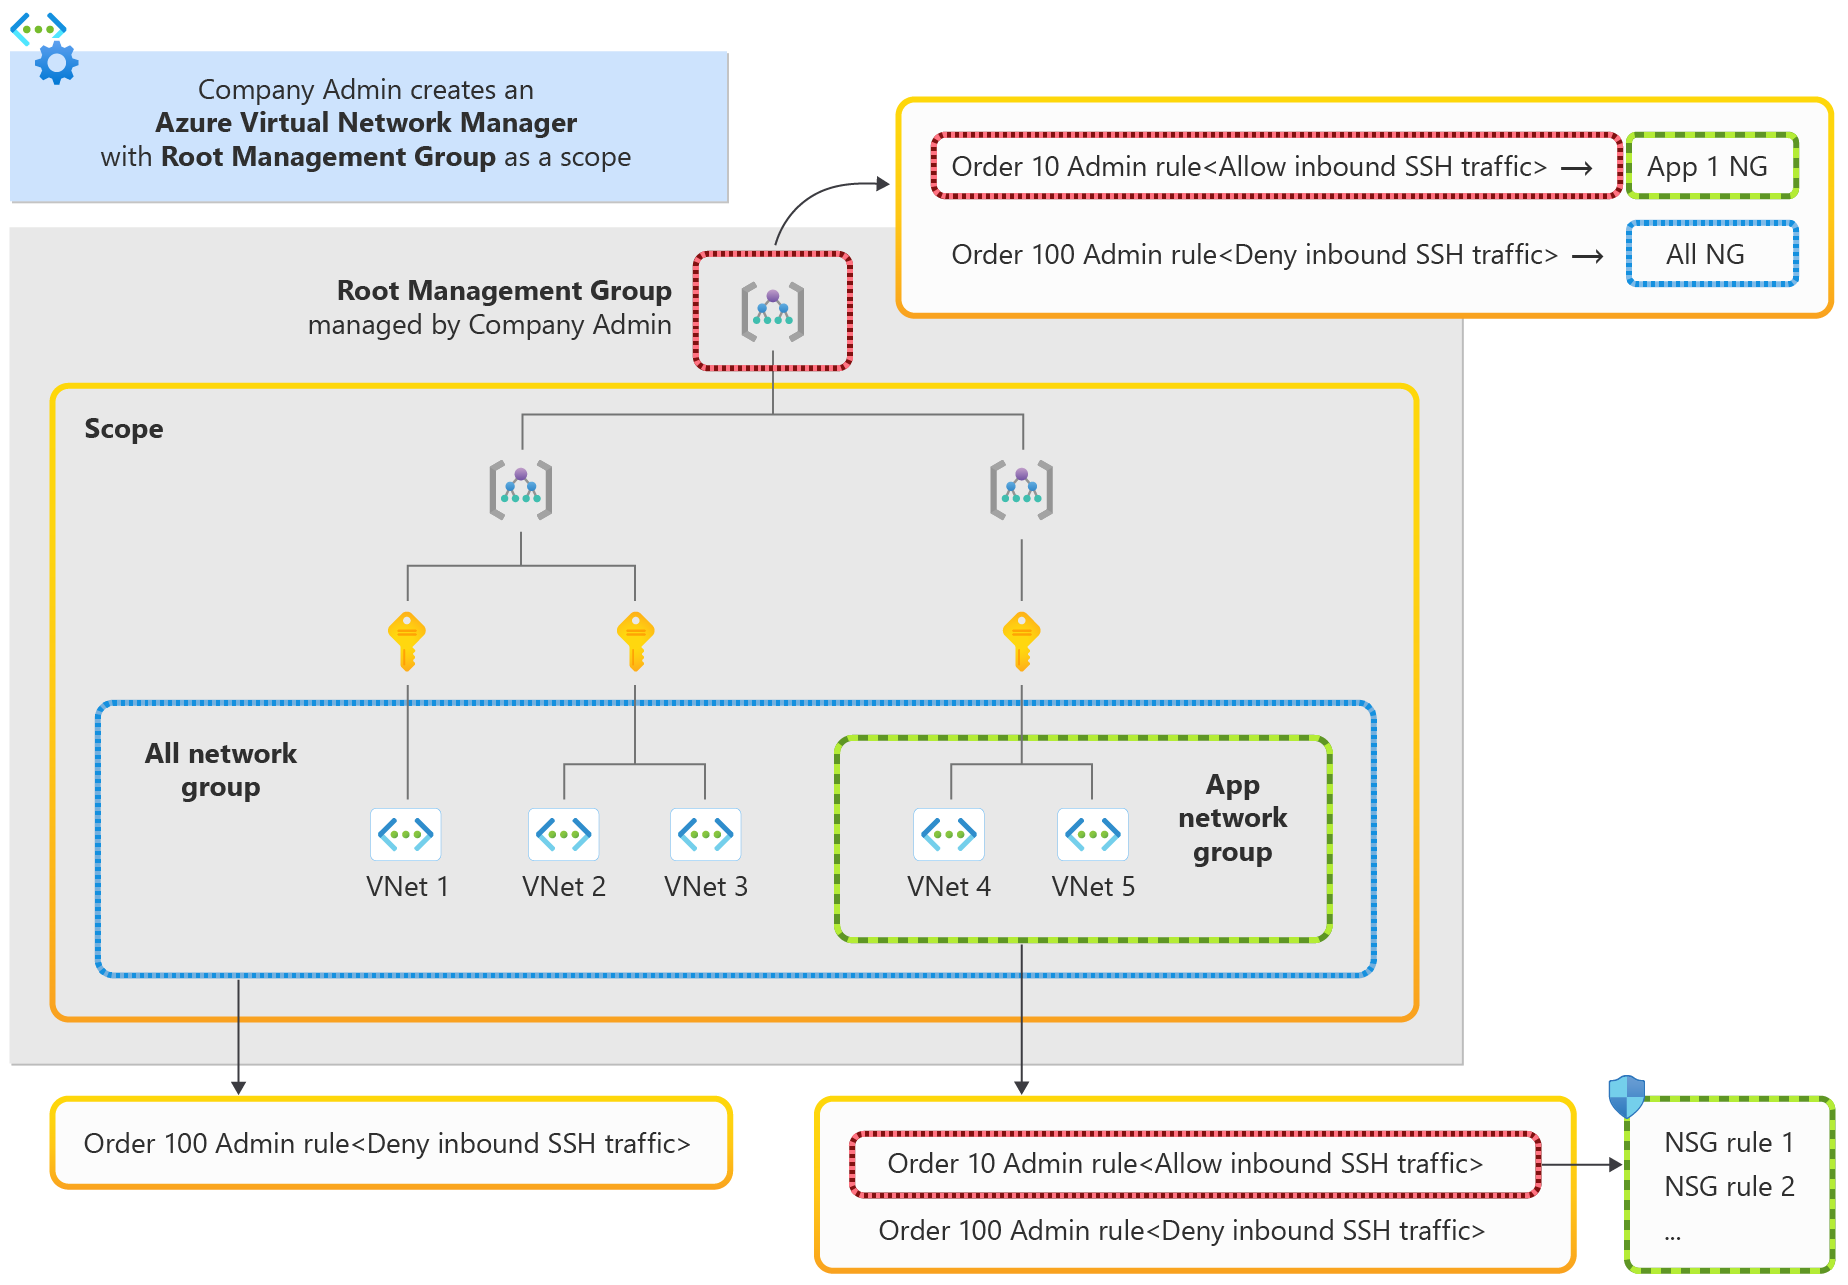 Diagram of security admin rules enforcement with network security groups.